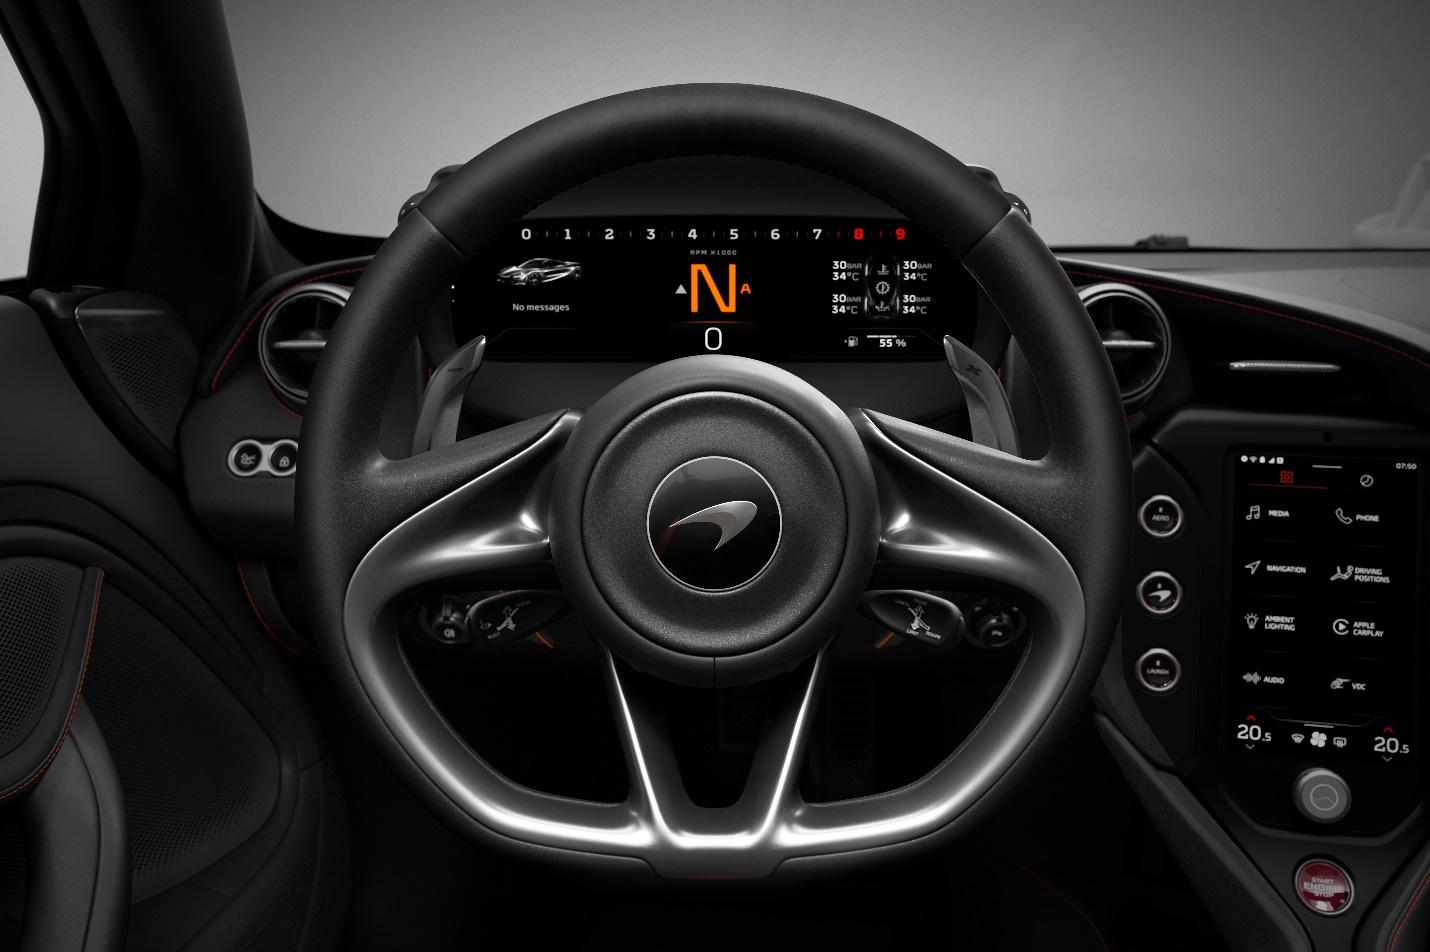 The steering wheel and dashboard of a car

Description automatically generated